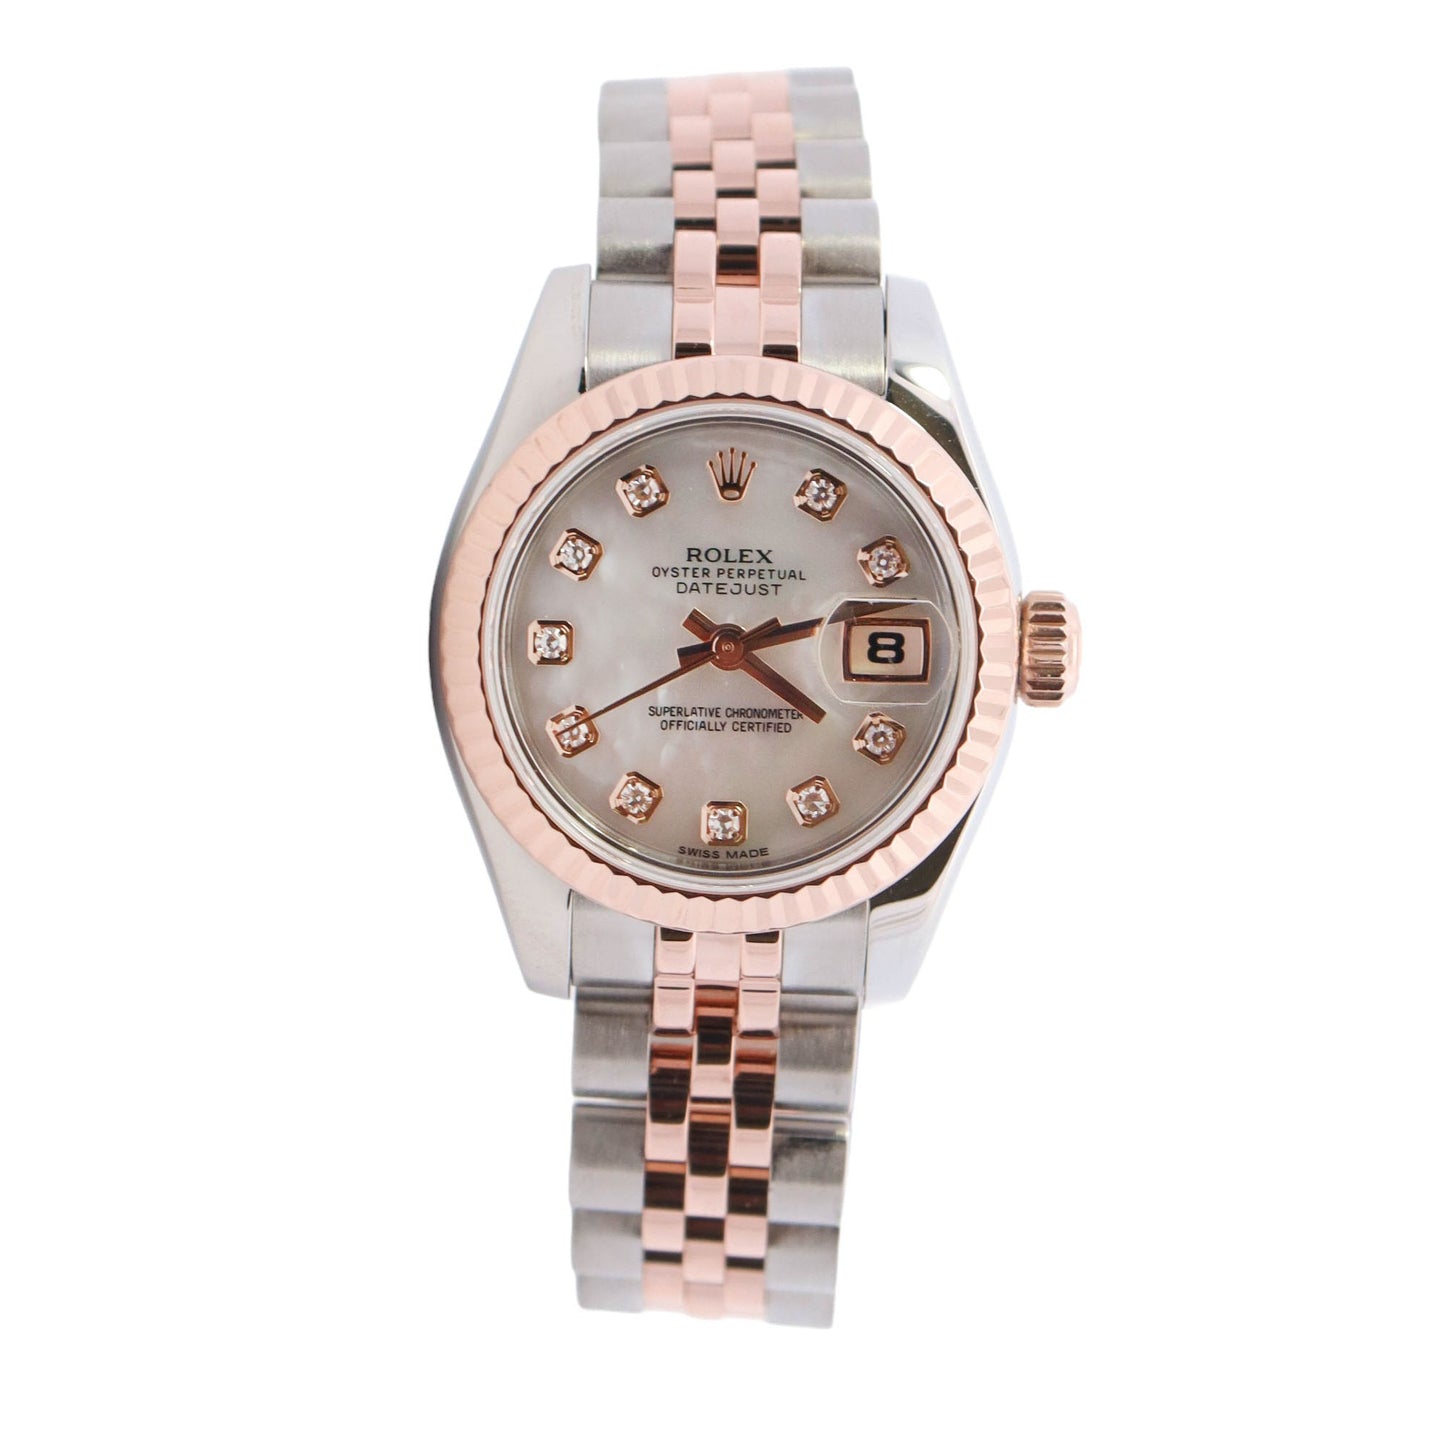 Rolex Datejust Two Tone Stainless Steel Rose Gold 26mm Factory Mop Diamond Dot Dial Watch Reference #: 179171 - Happy Jewelers Fine Jewelry Lifetime Warranty